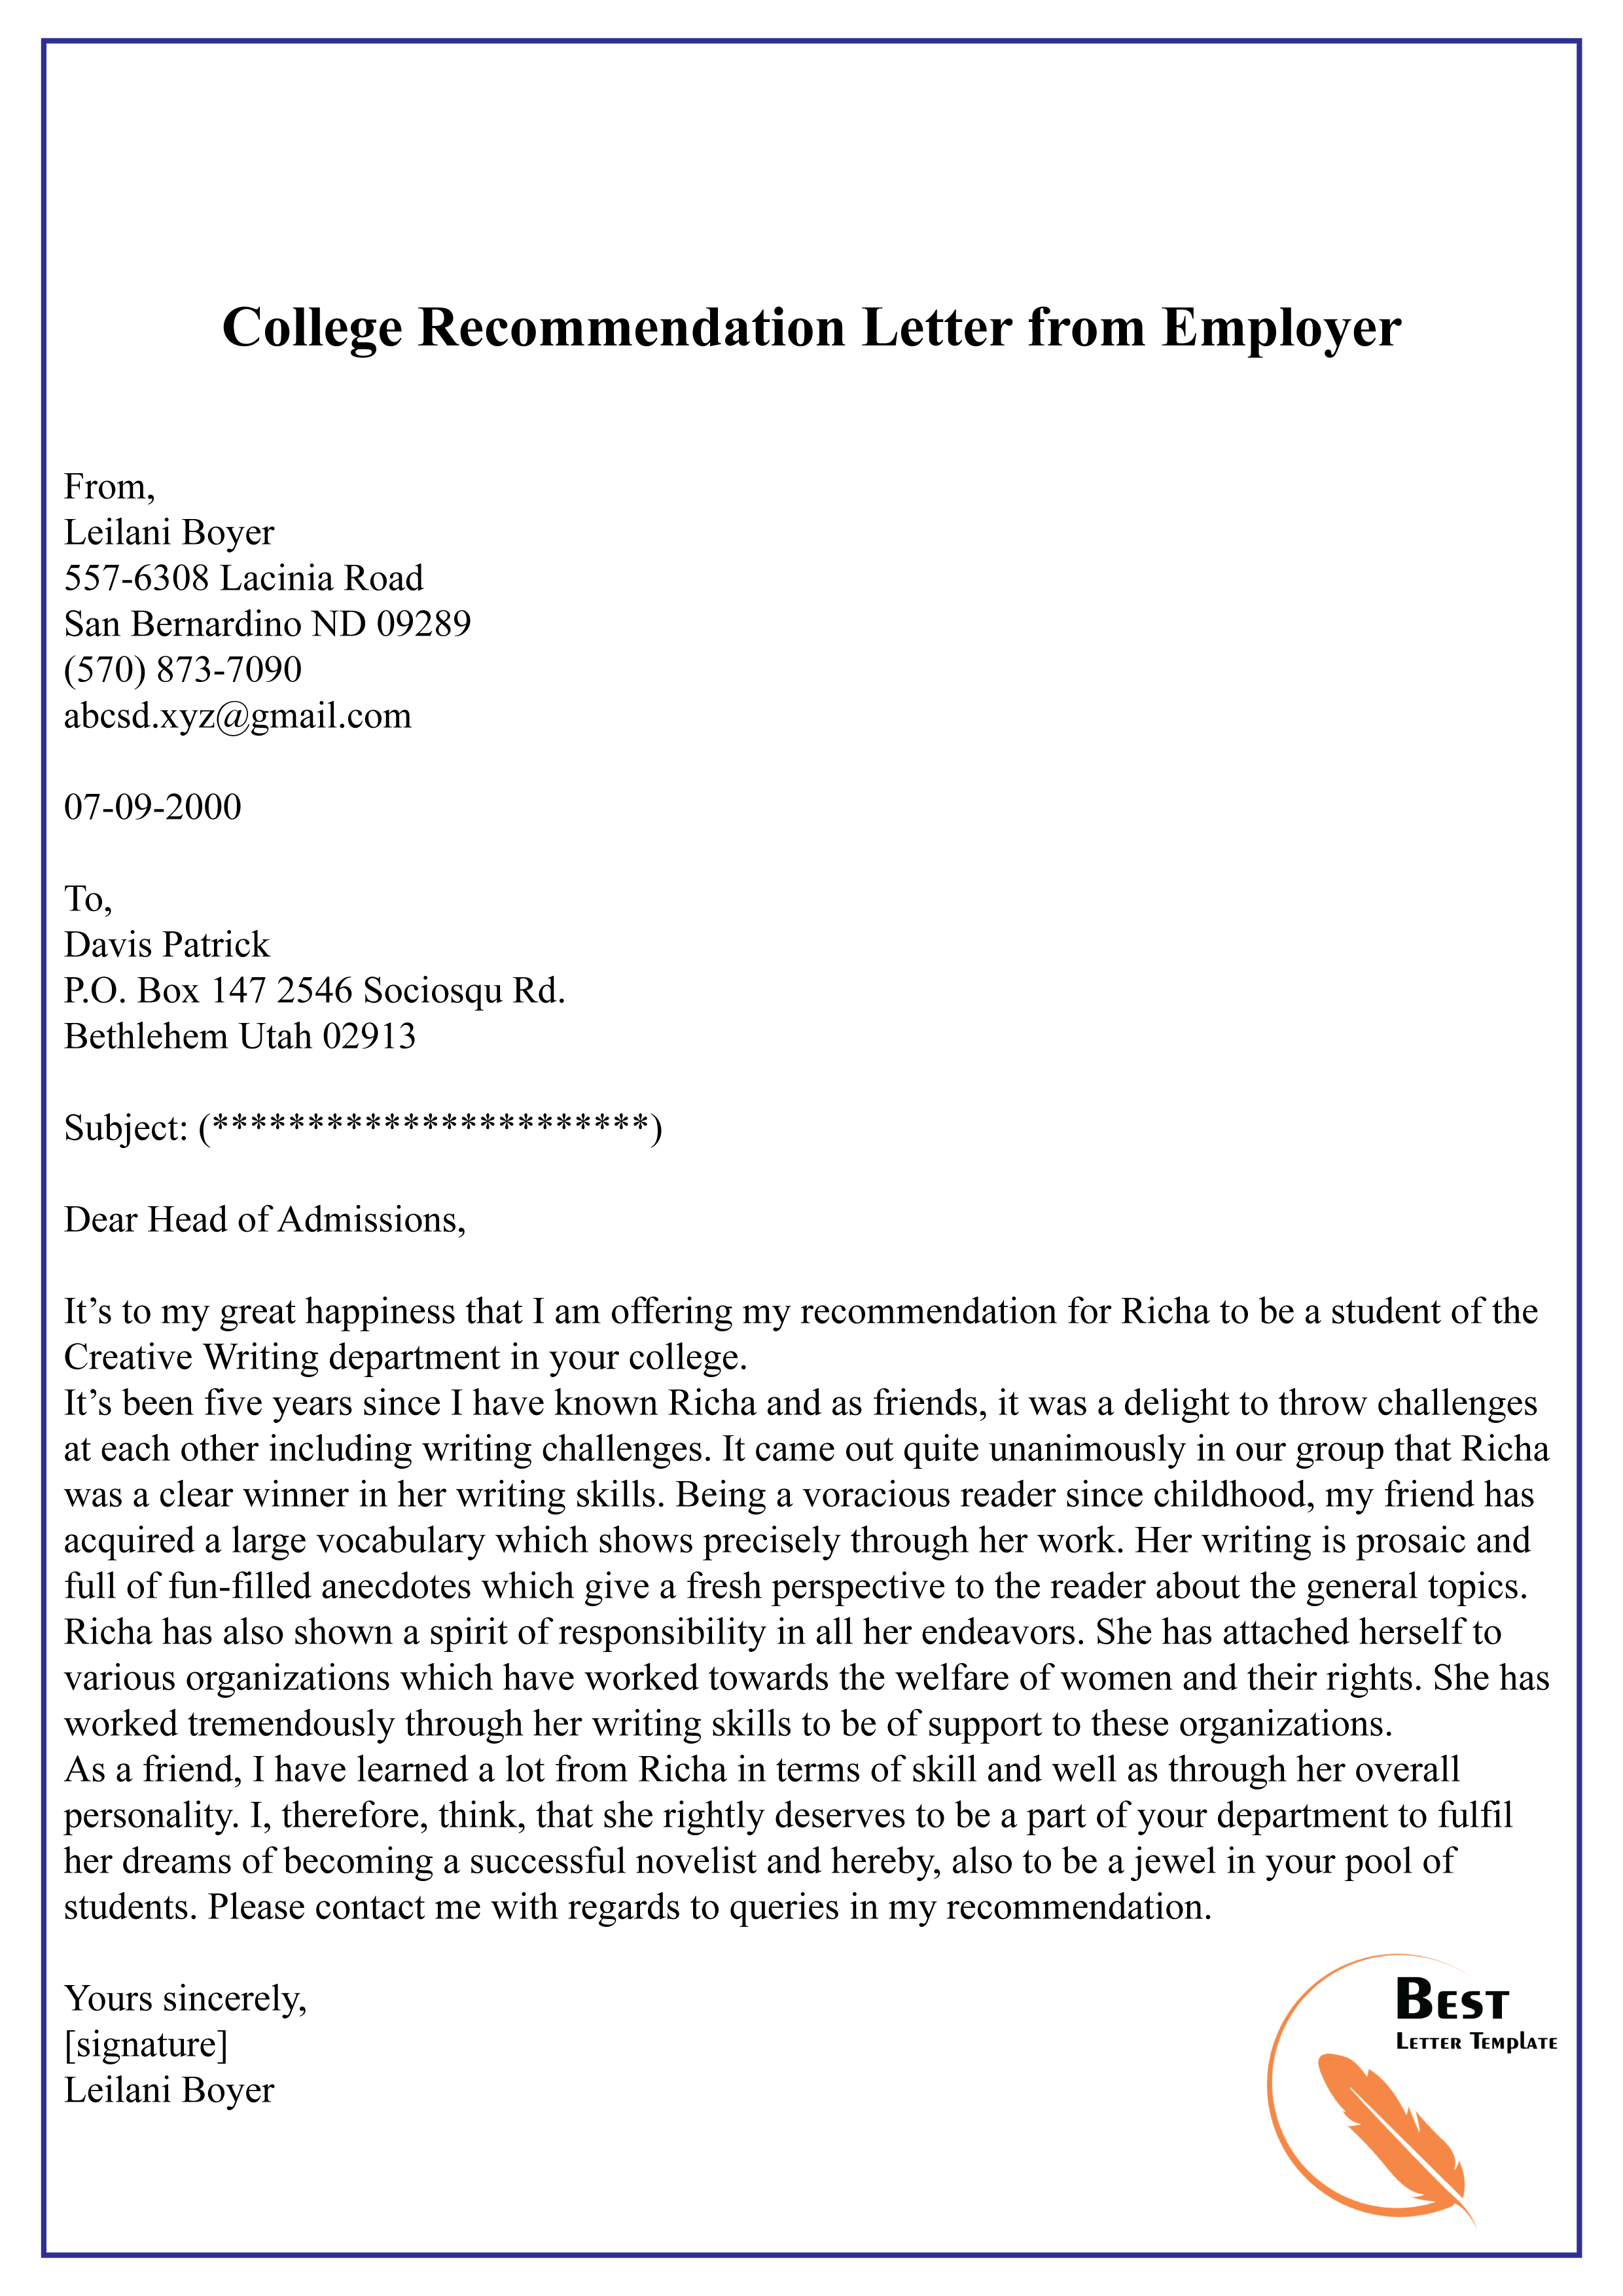 College Recommendation Letter From An Employer from bestlettertemplate.com